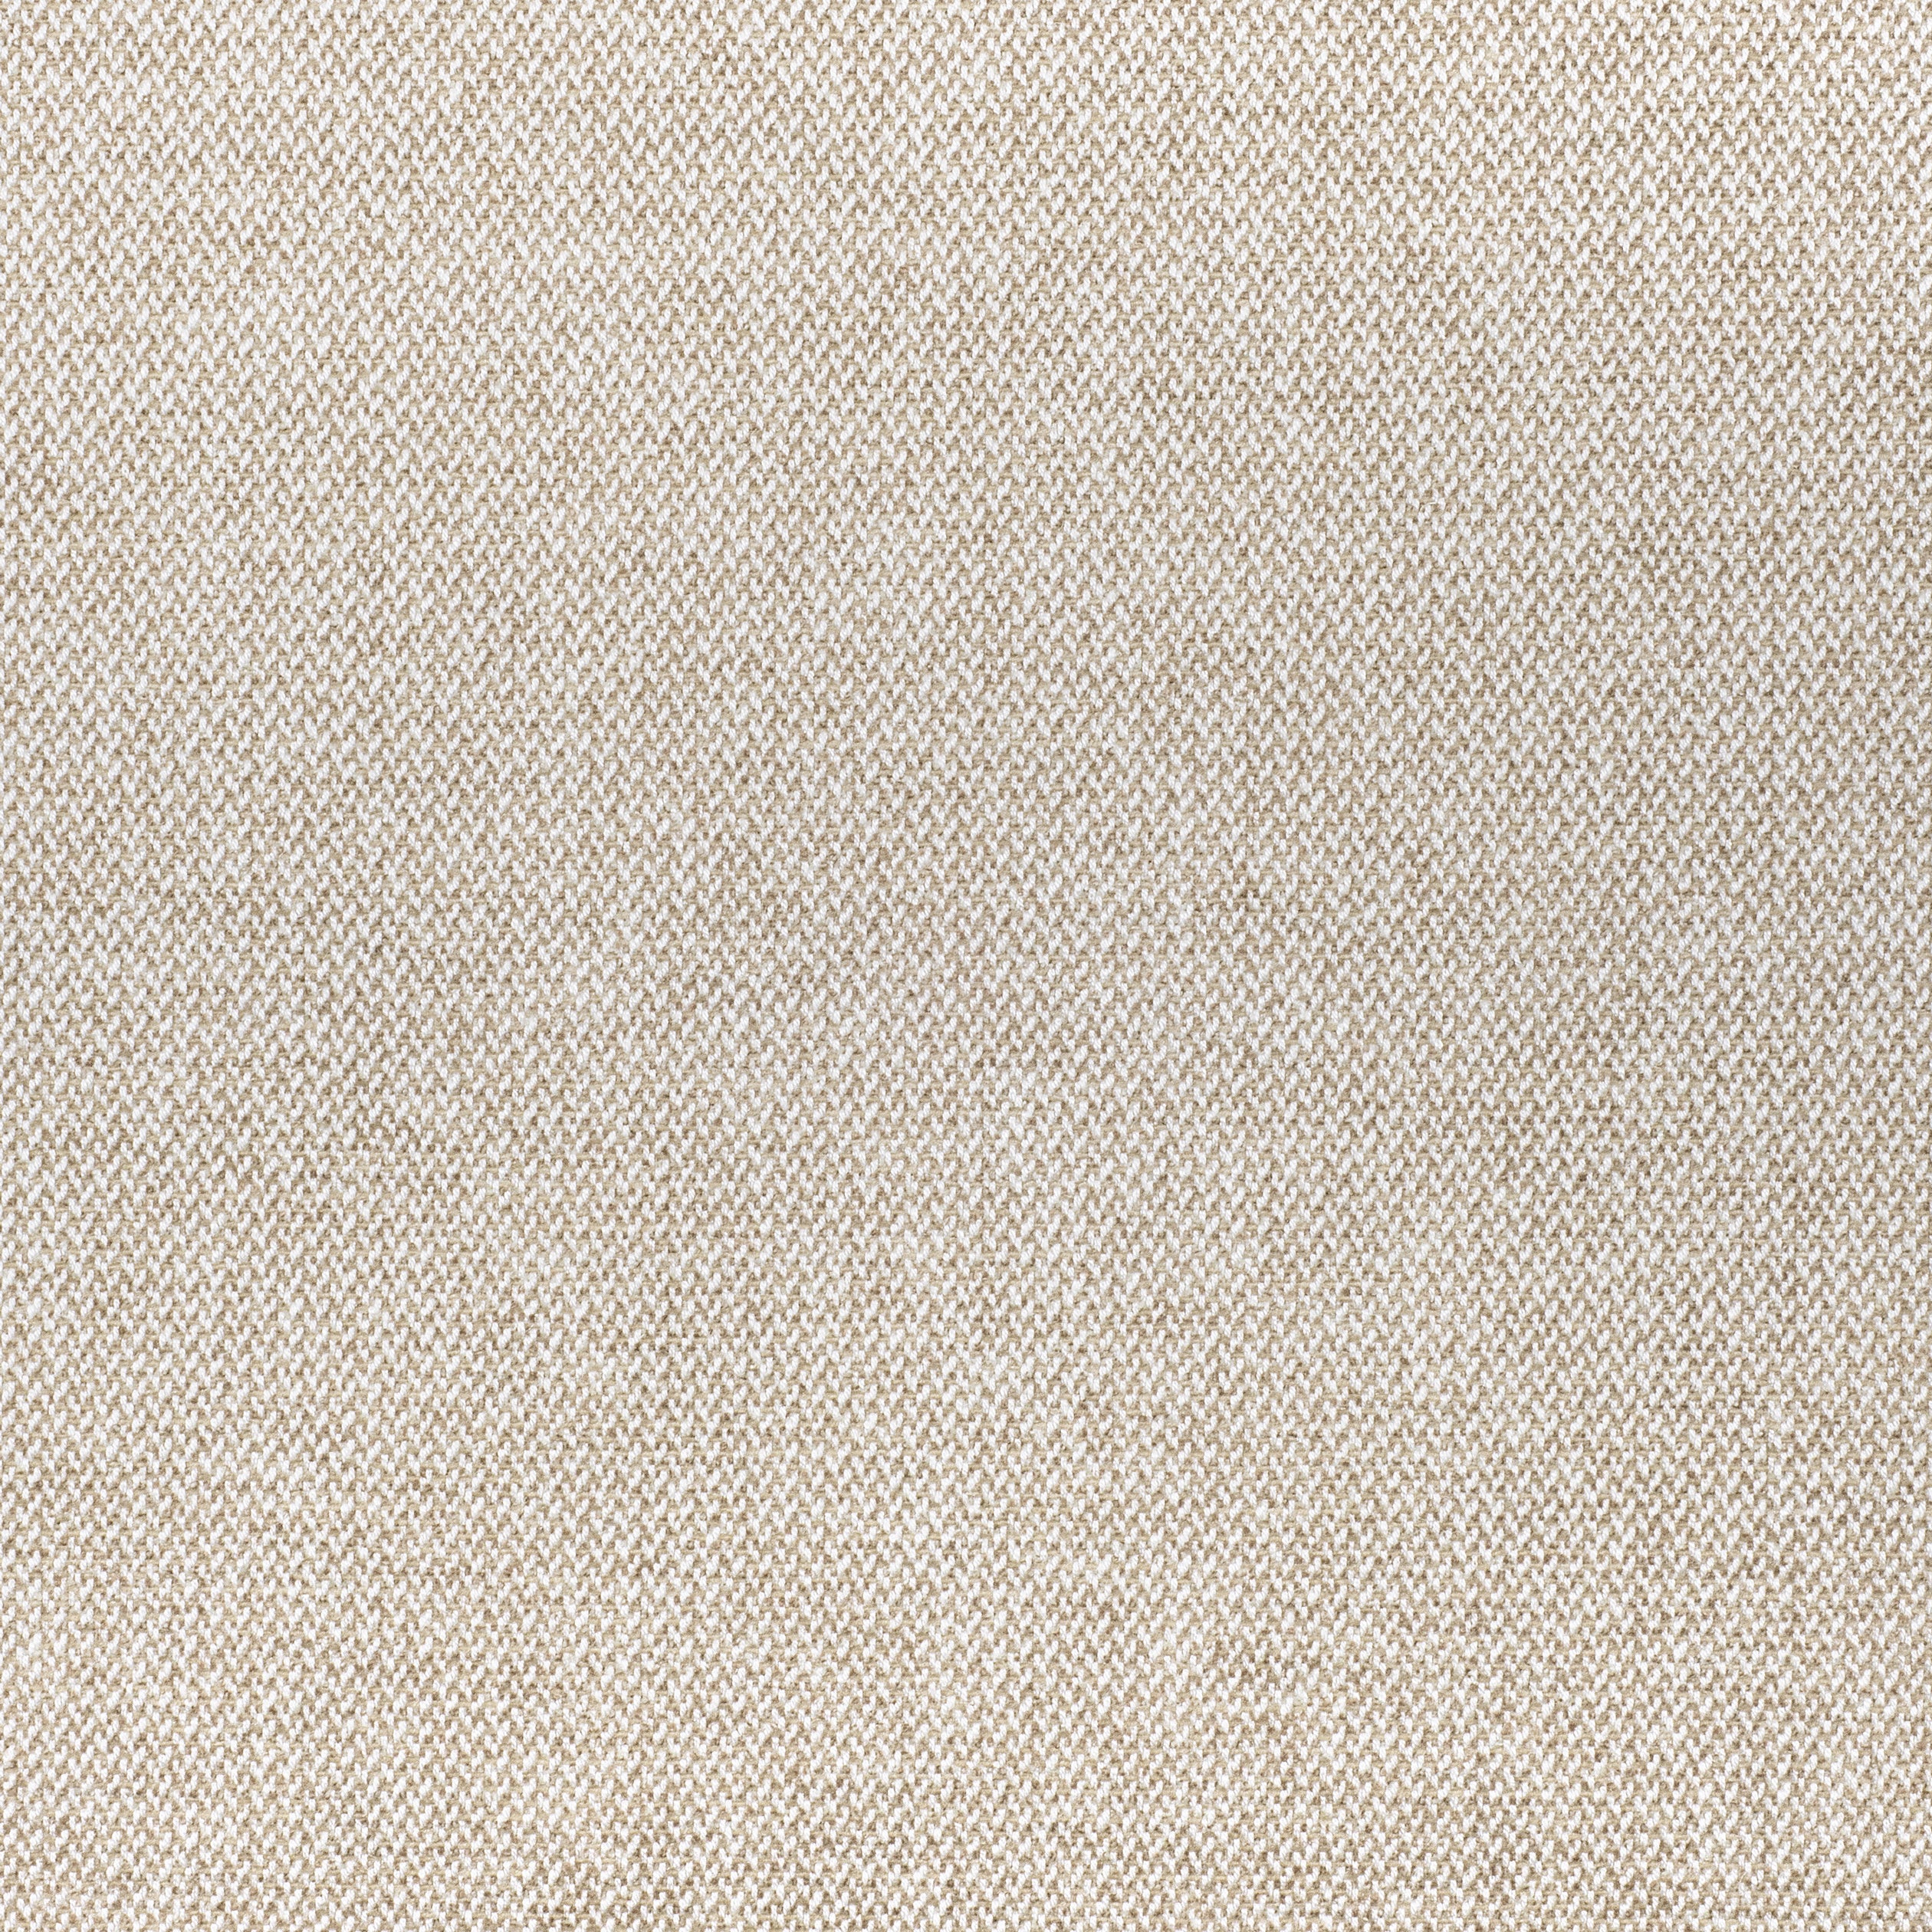 Picco fabric in flax color - pattern number W80704 - by Thibaut in the Woven Resource 11: Rialto collection